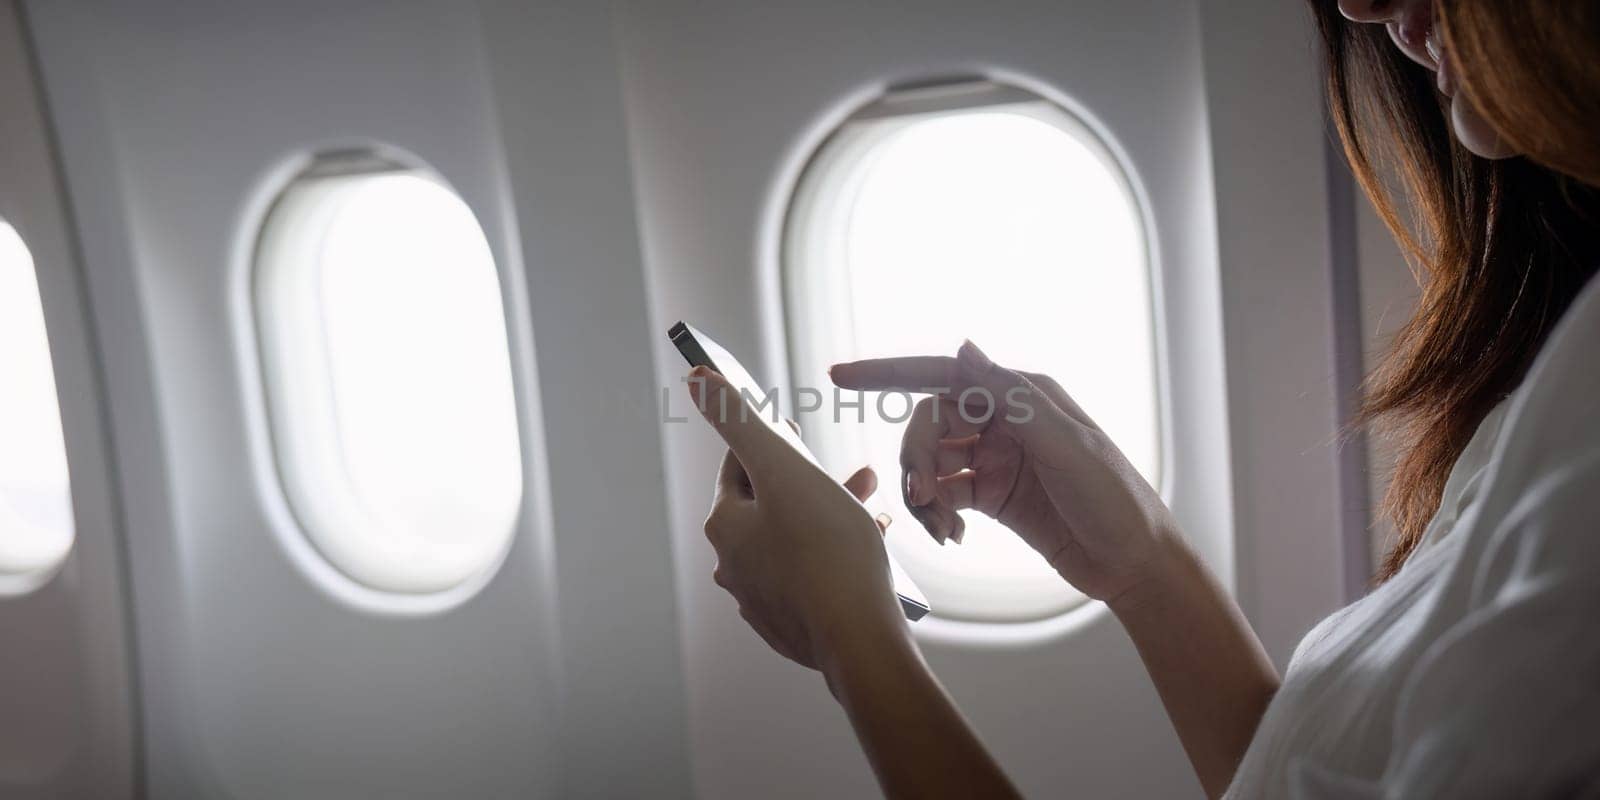 Modern Technology in Air Travel, Passenger Using Smartphone on Airplane for Connectivity and Entertainment by nateemee